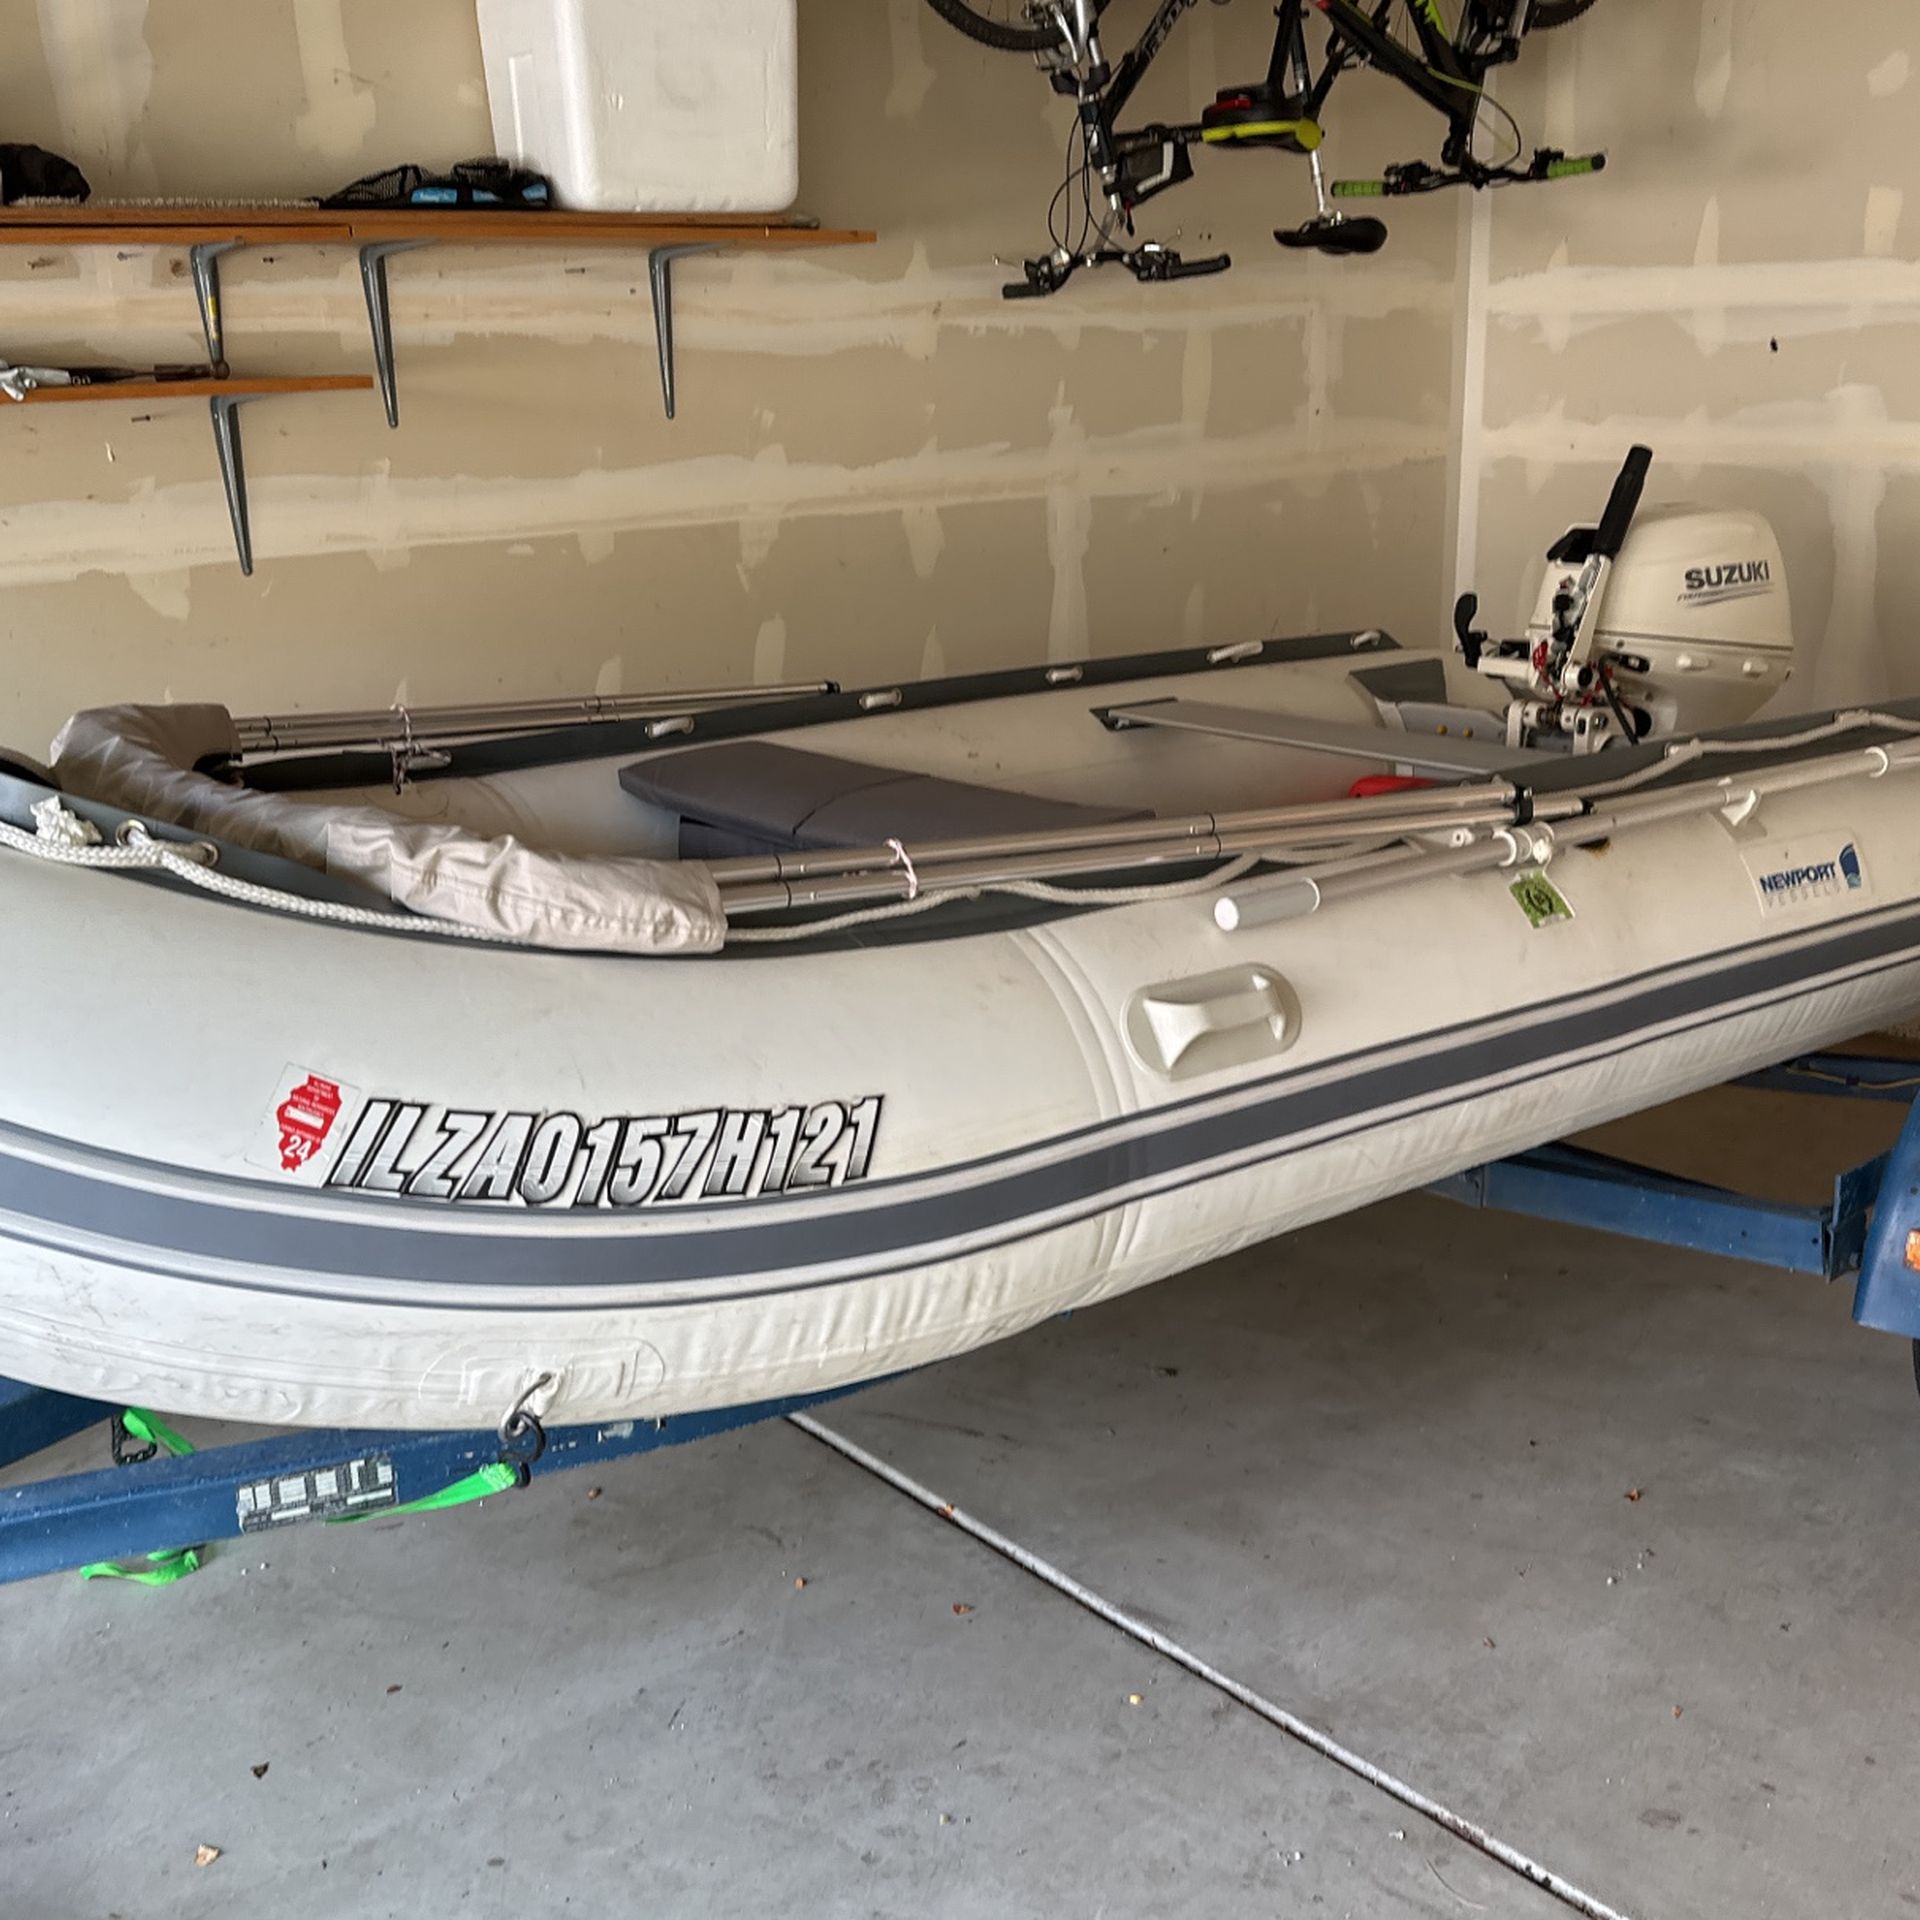 Newport inflatable boat with motor and trailer